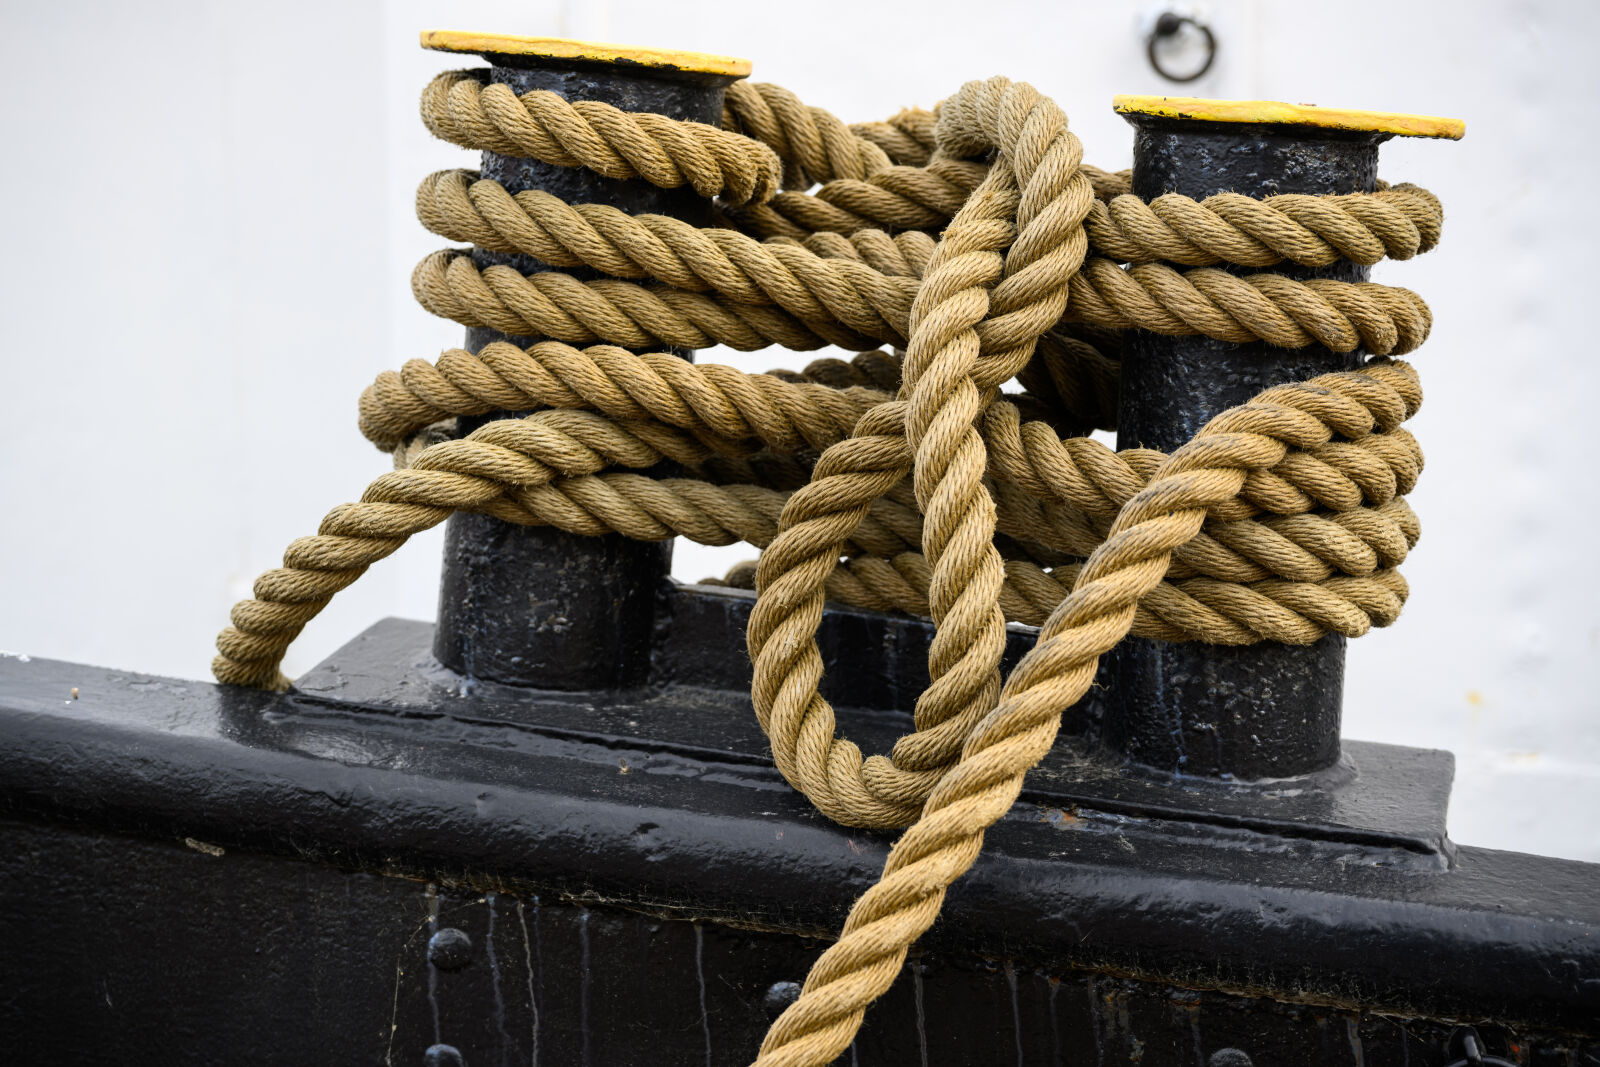 Nikon Z8 sample photo. Rope of the boat photography